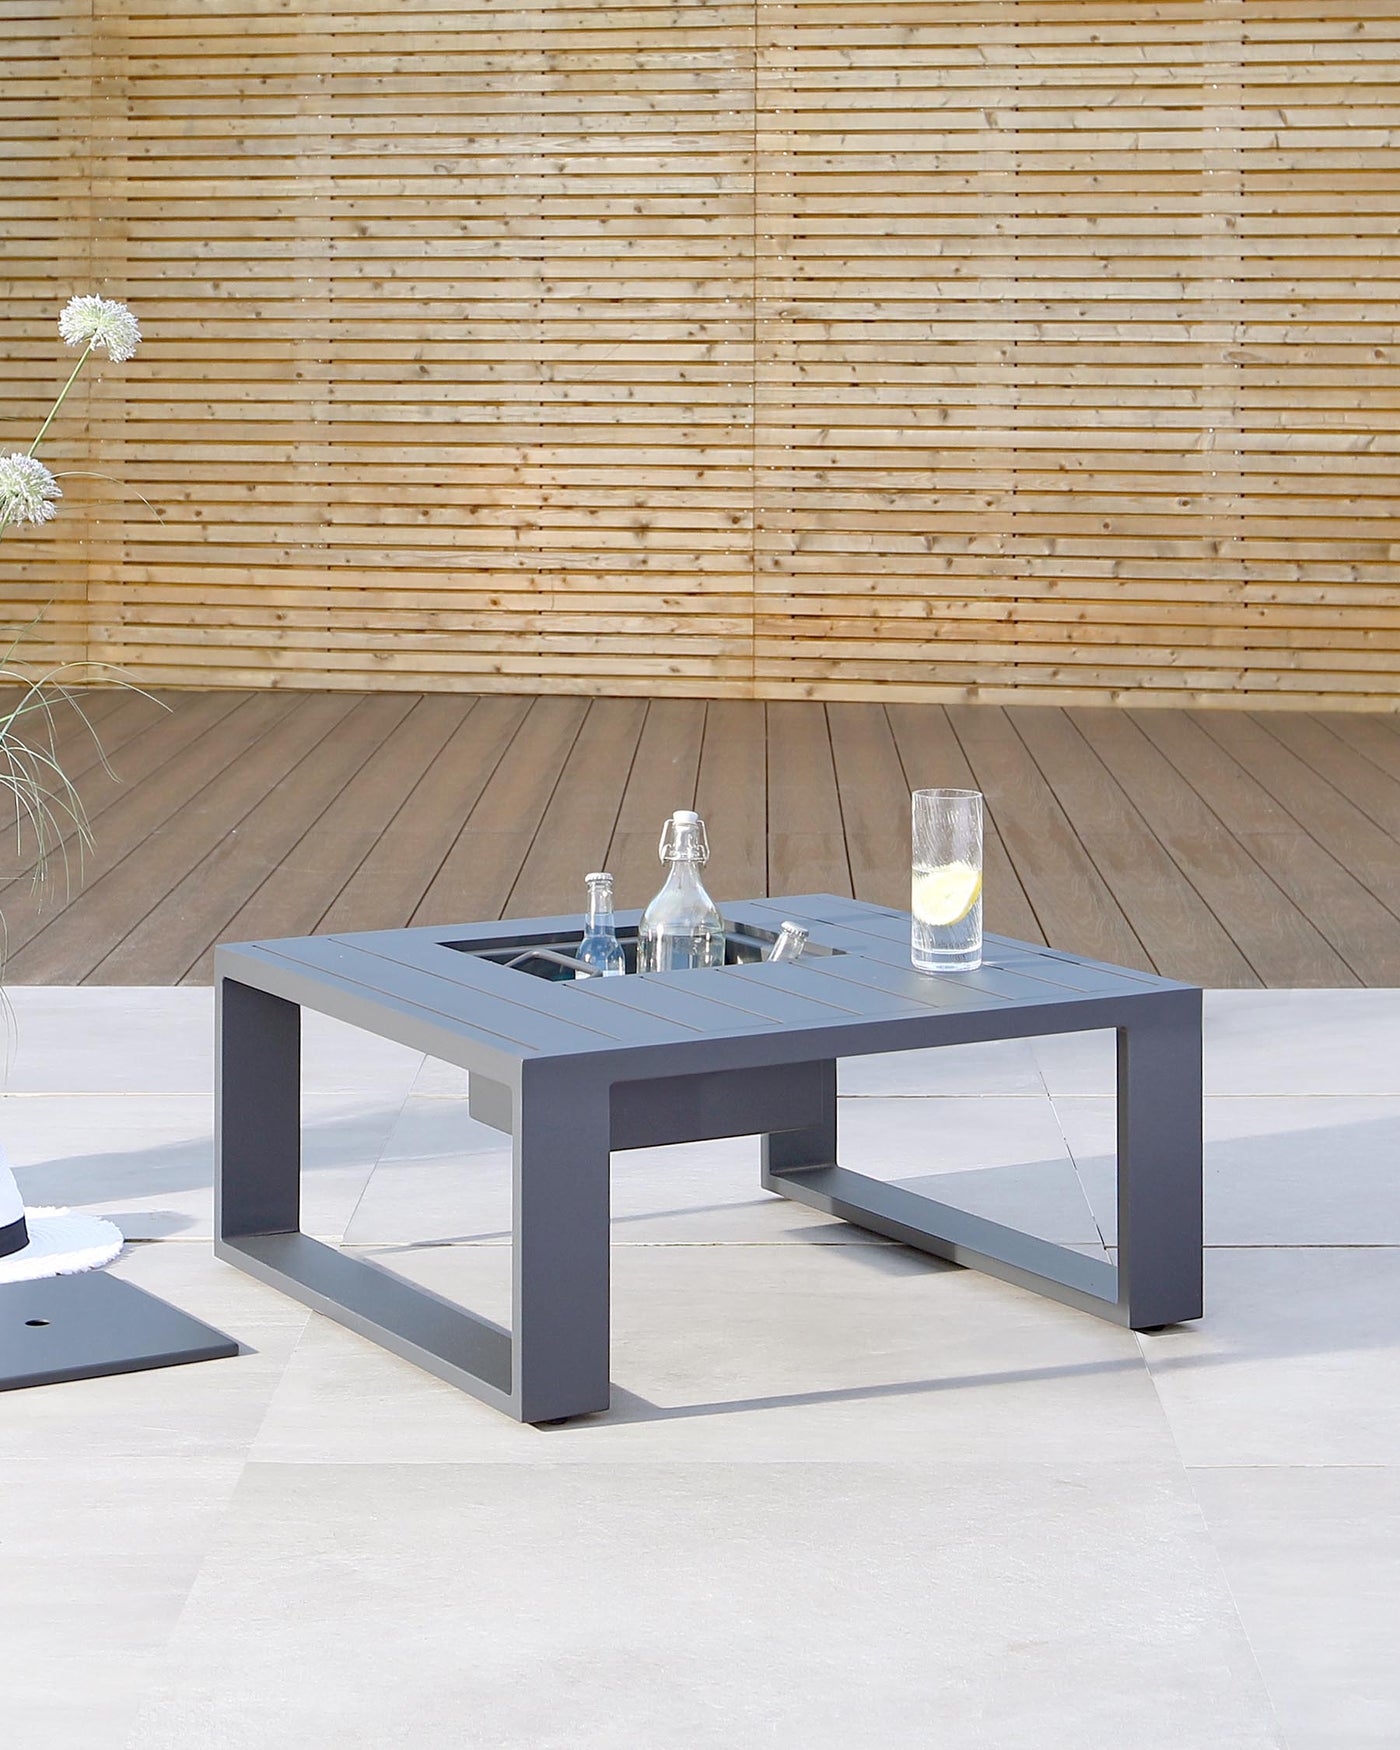 Contemporary dark grey square outdoor coffee table with integrated ice bucket feature in the centre, showcased on a patio with light flooring and a bamboo backdrop.